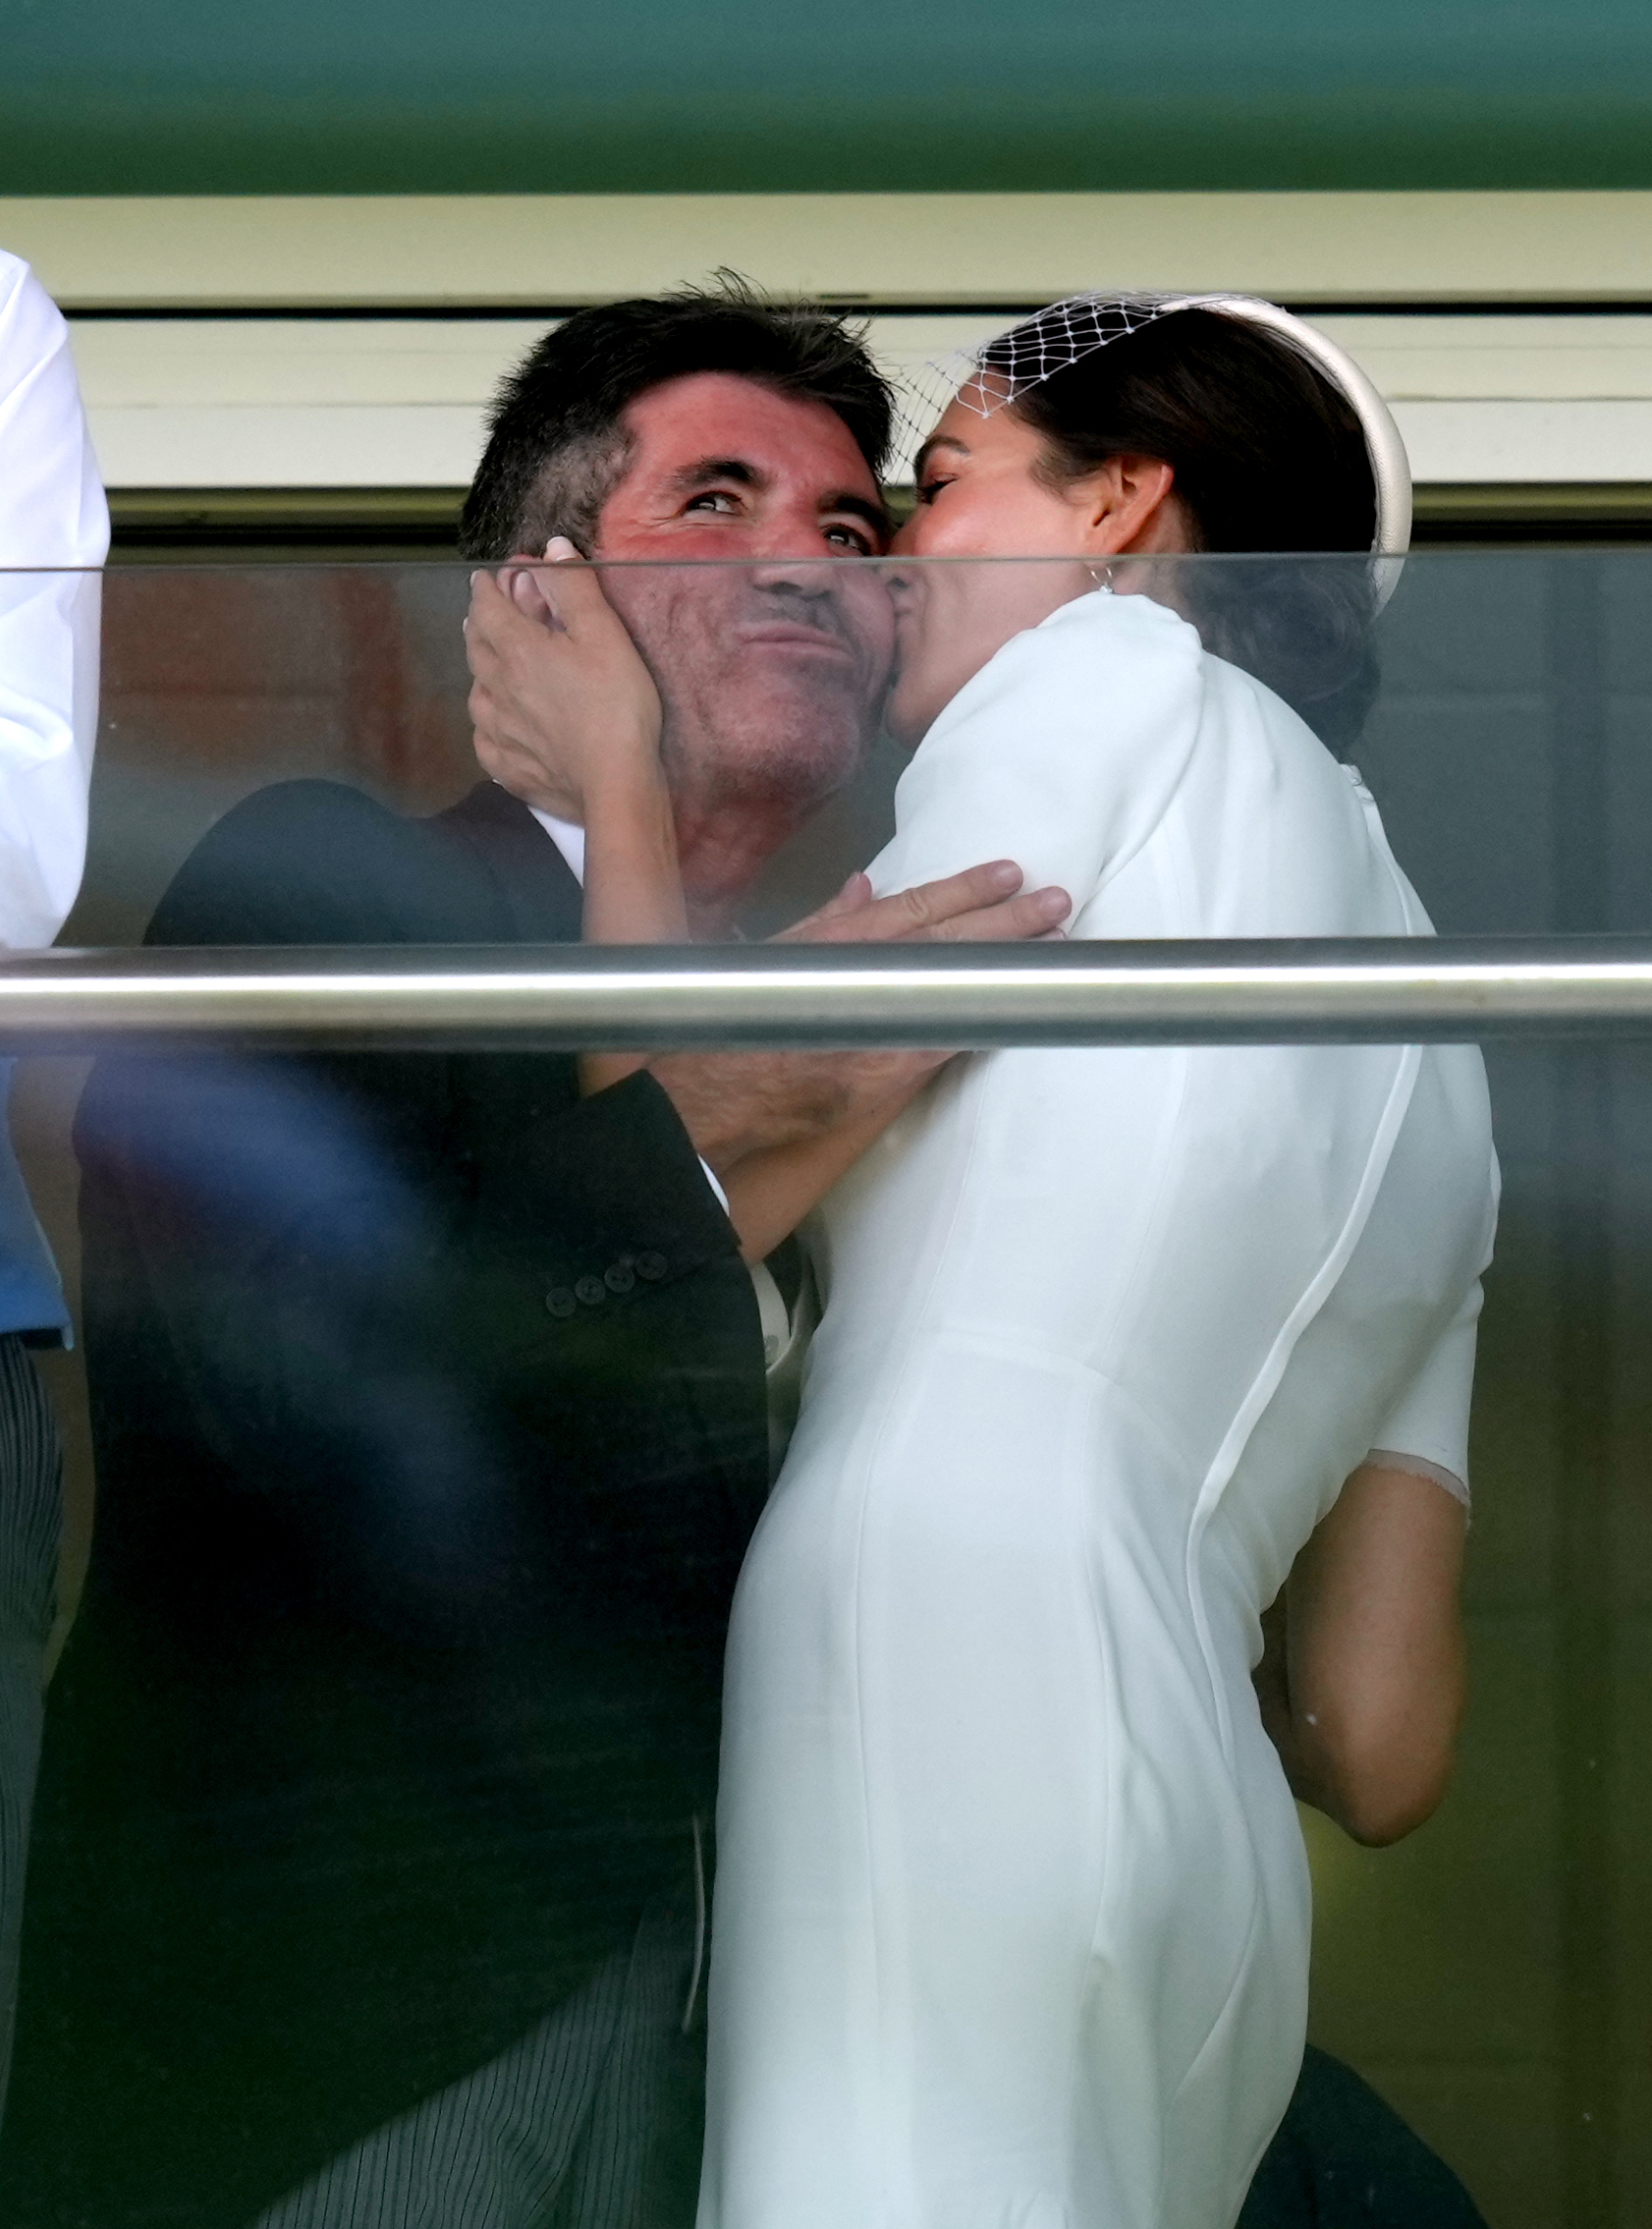 Simon Cowell and Lauren Silverman in Epsom, England on June 5, 2021 | Source: Getty Images